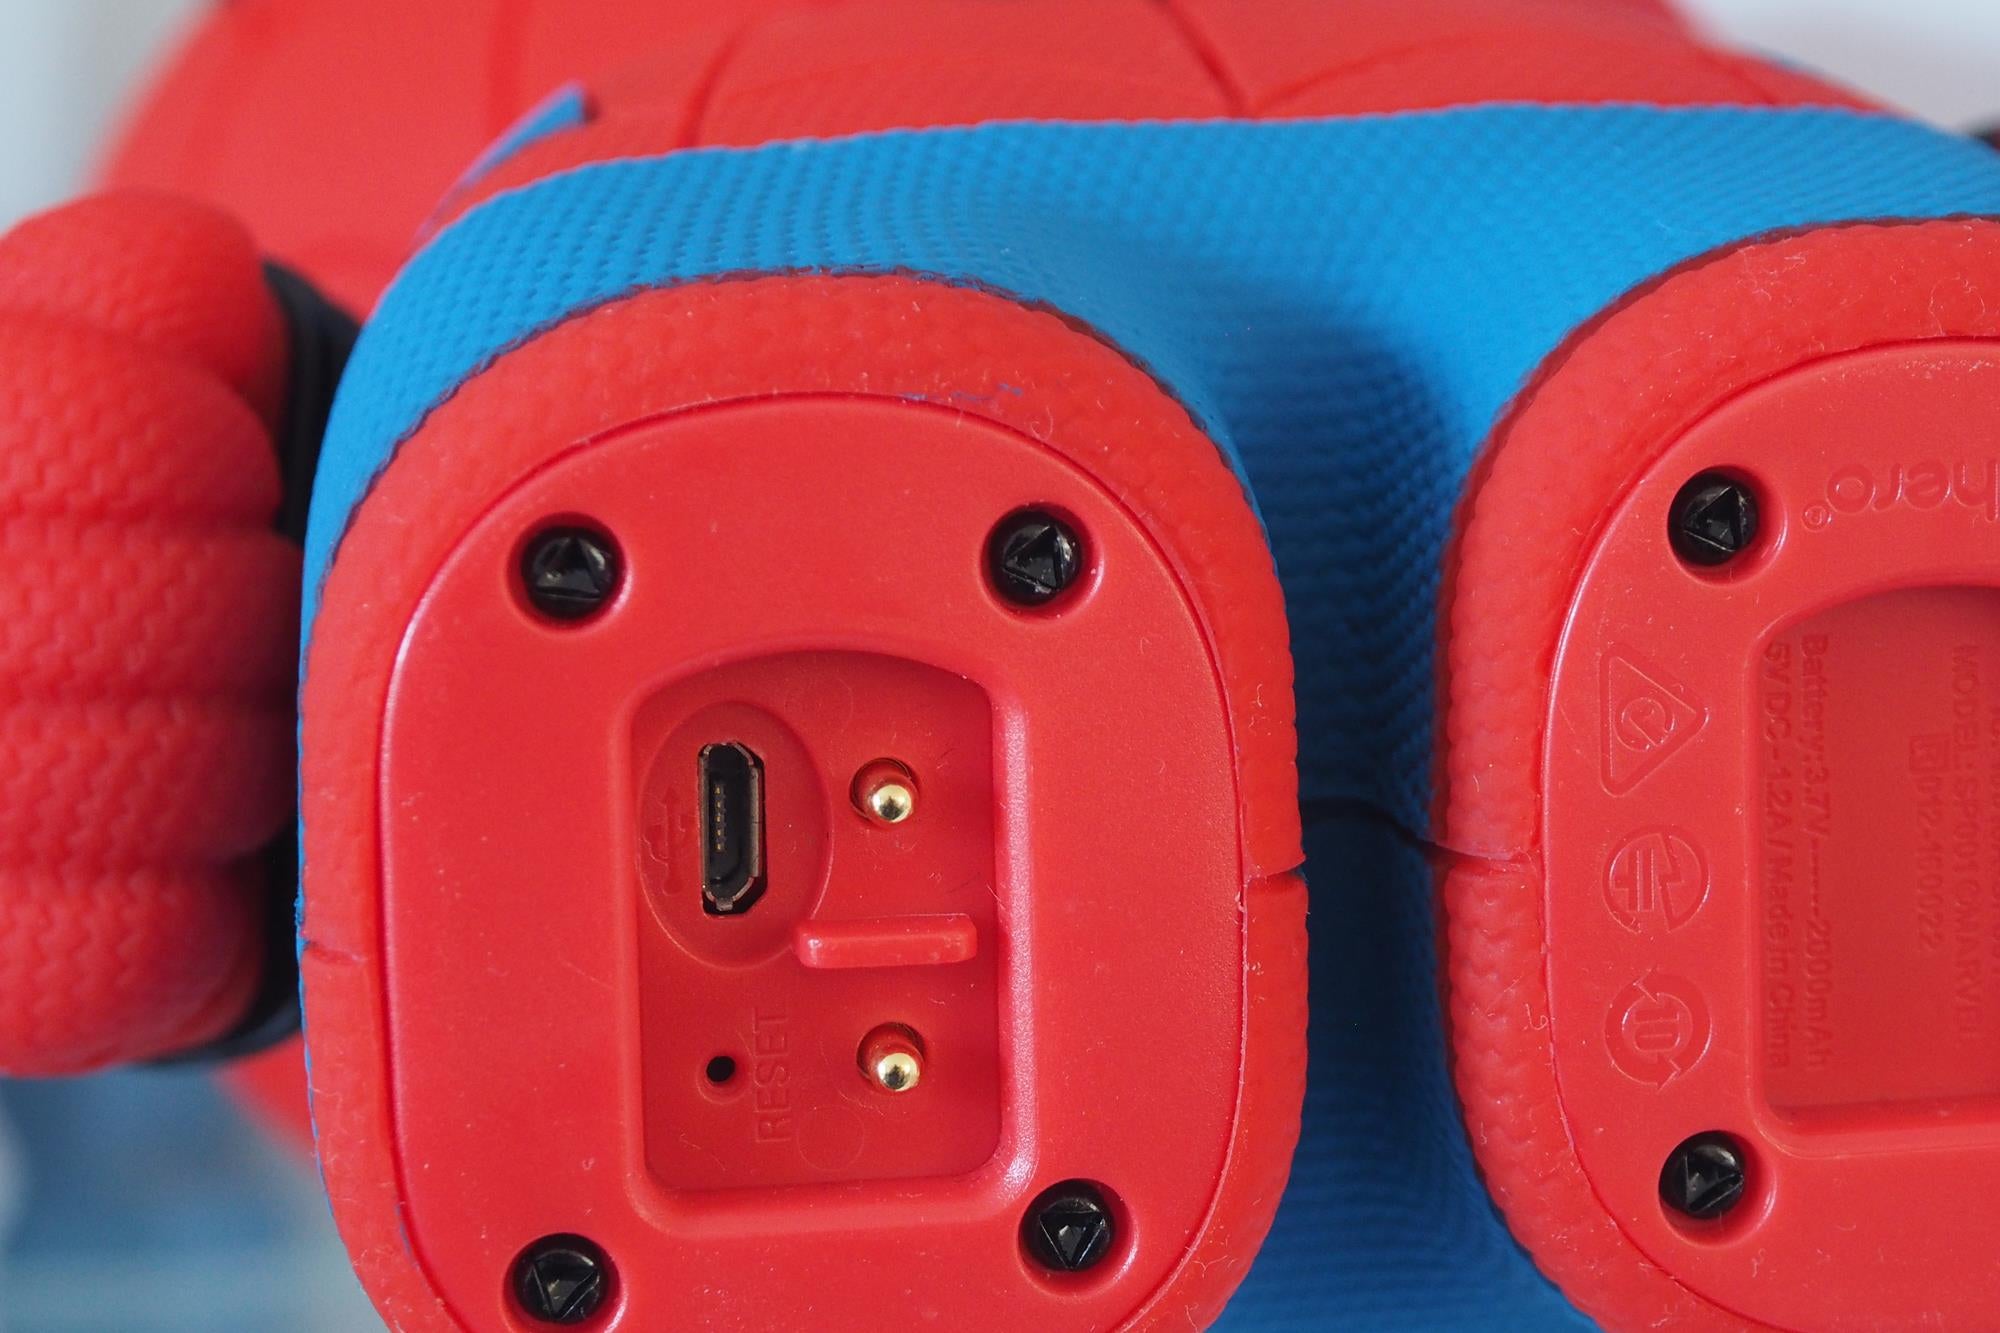 Close-up of Sphero Spider-Man's charging port and reset button.